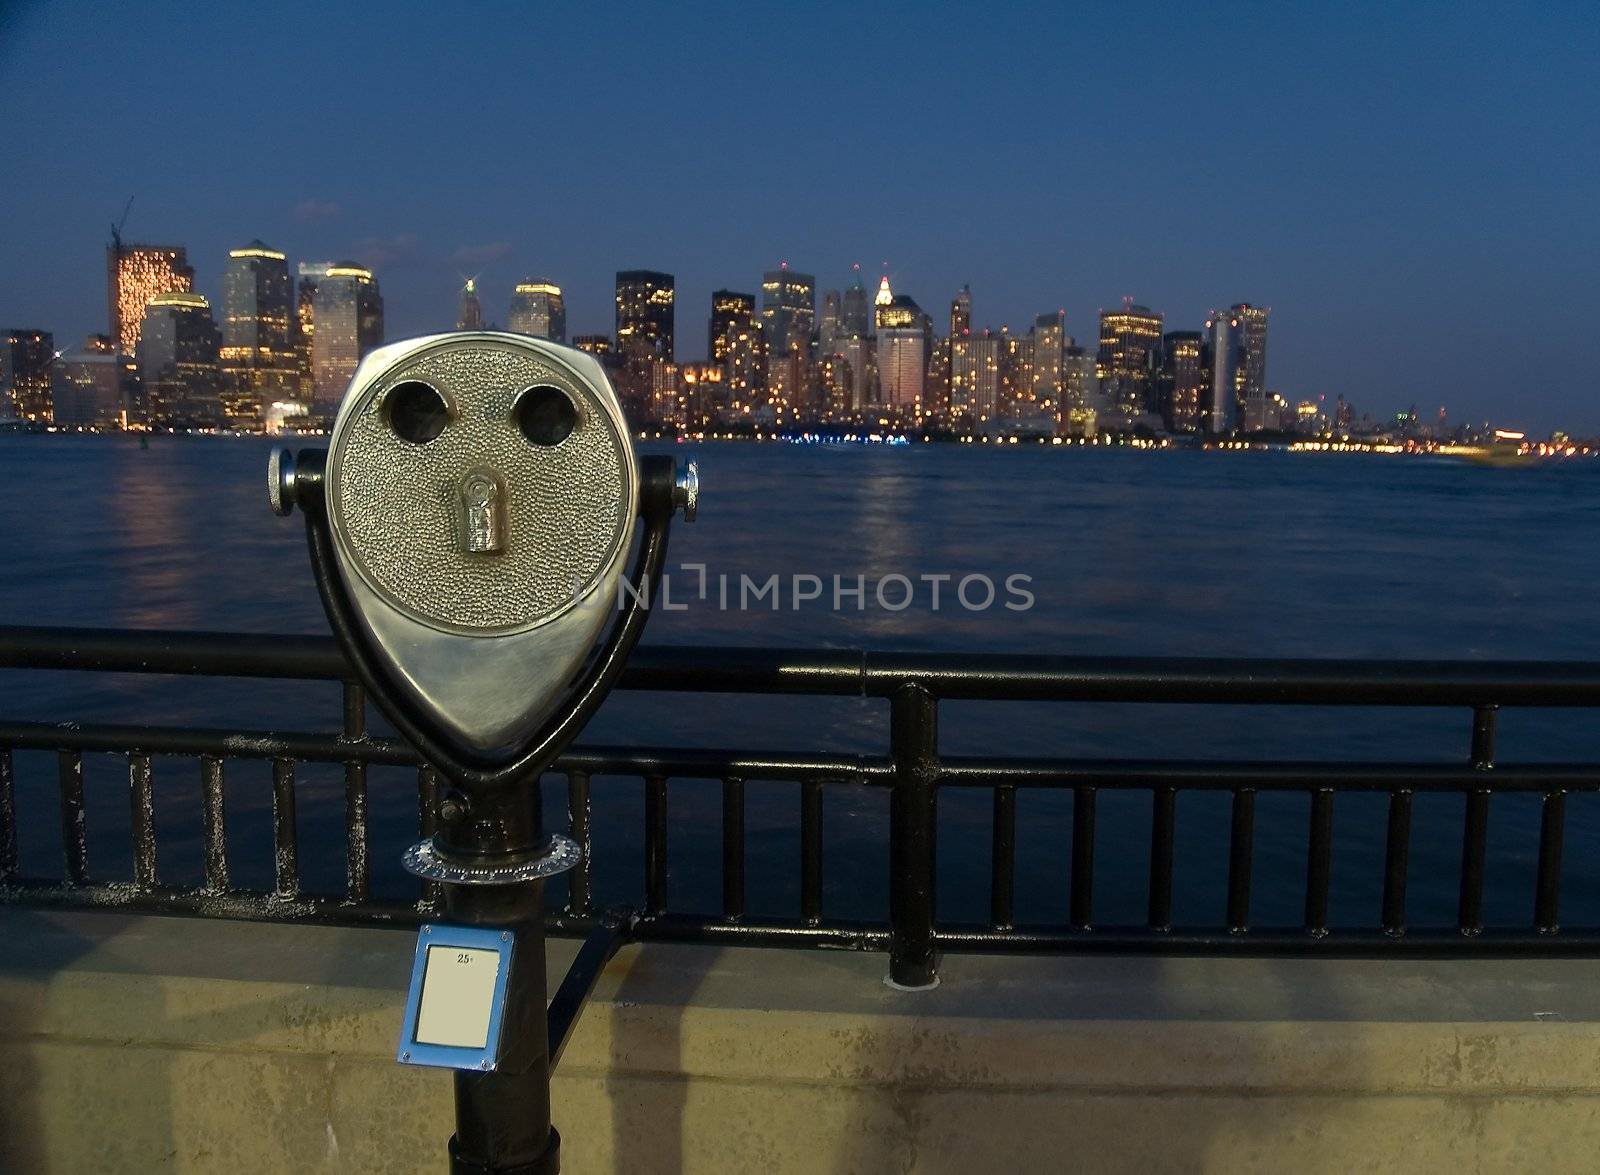 steel coin binoculars and new york in background, dusk, photo taken from new jersey